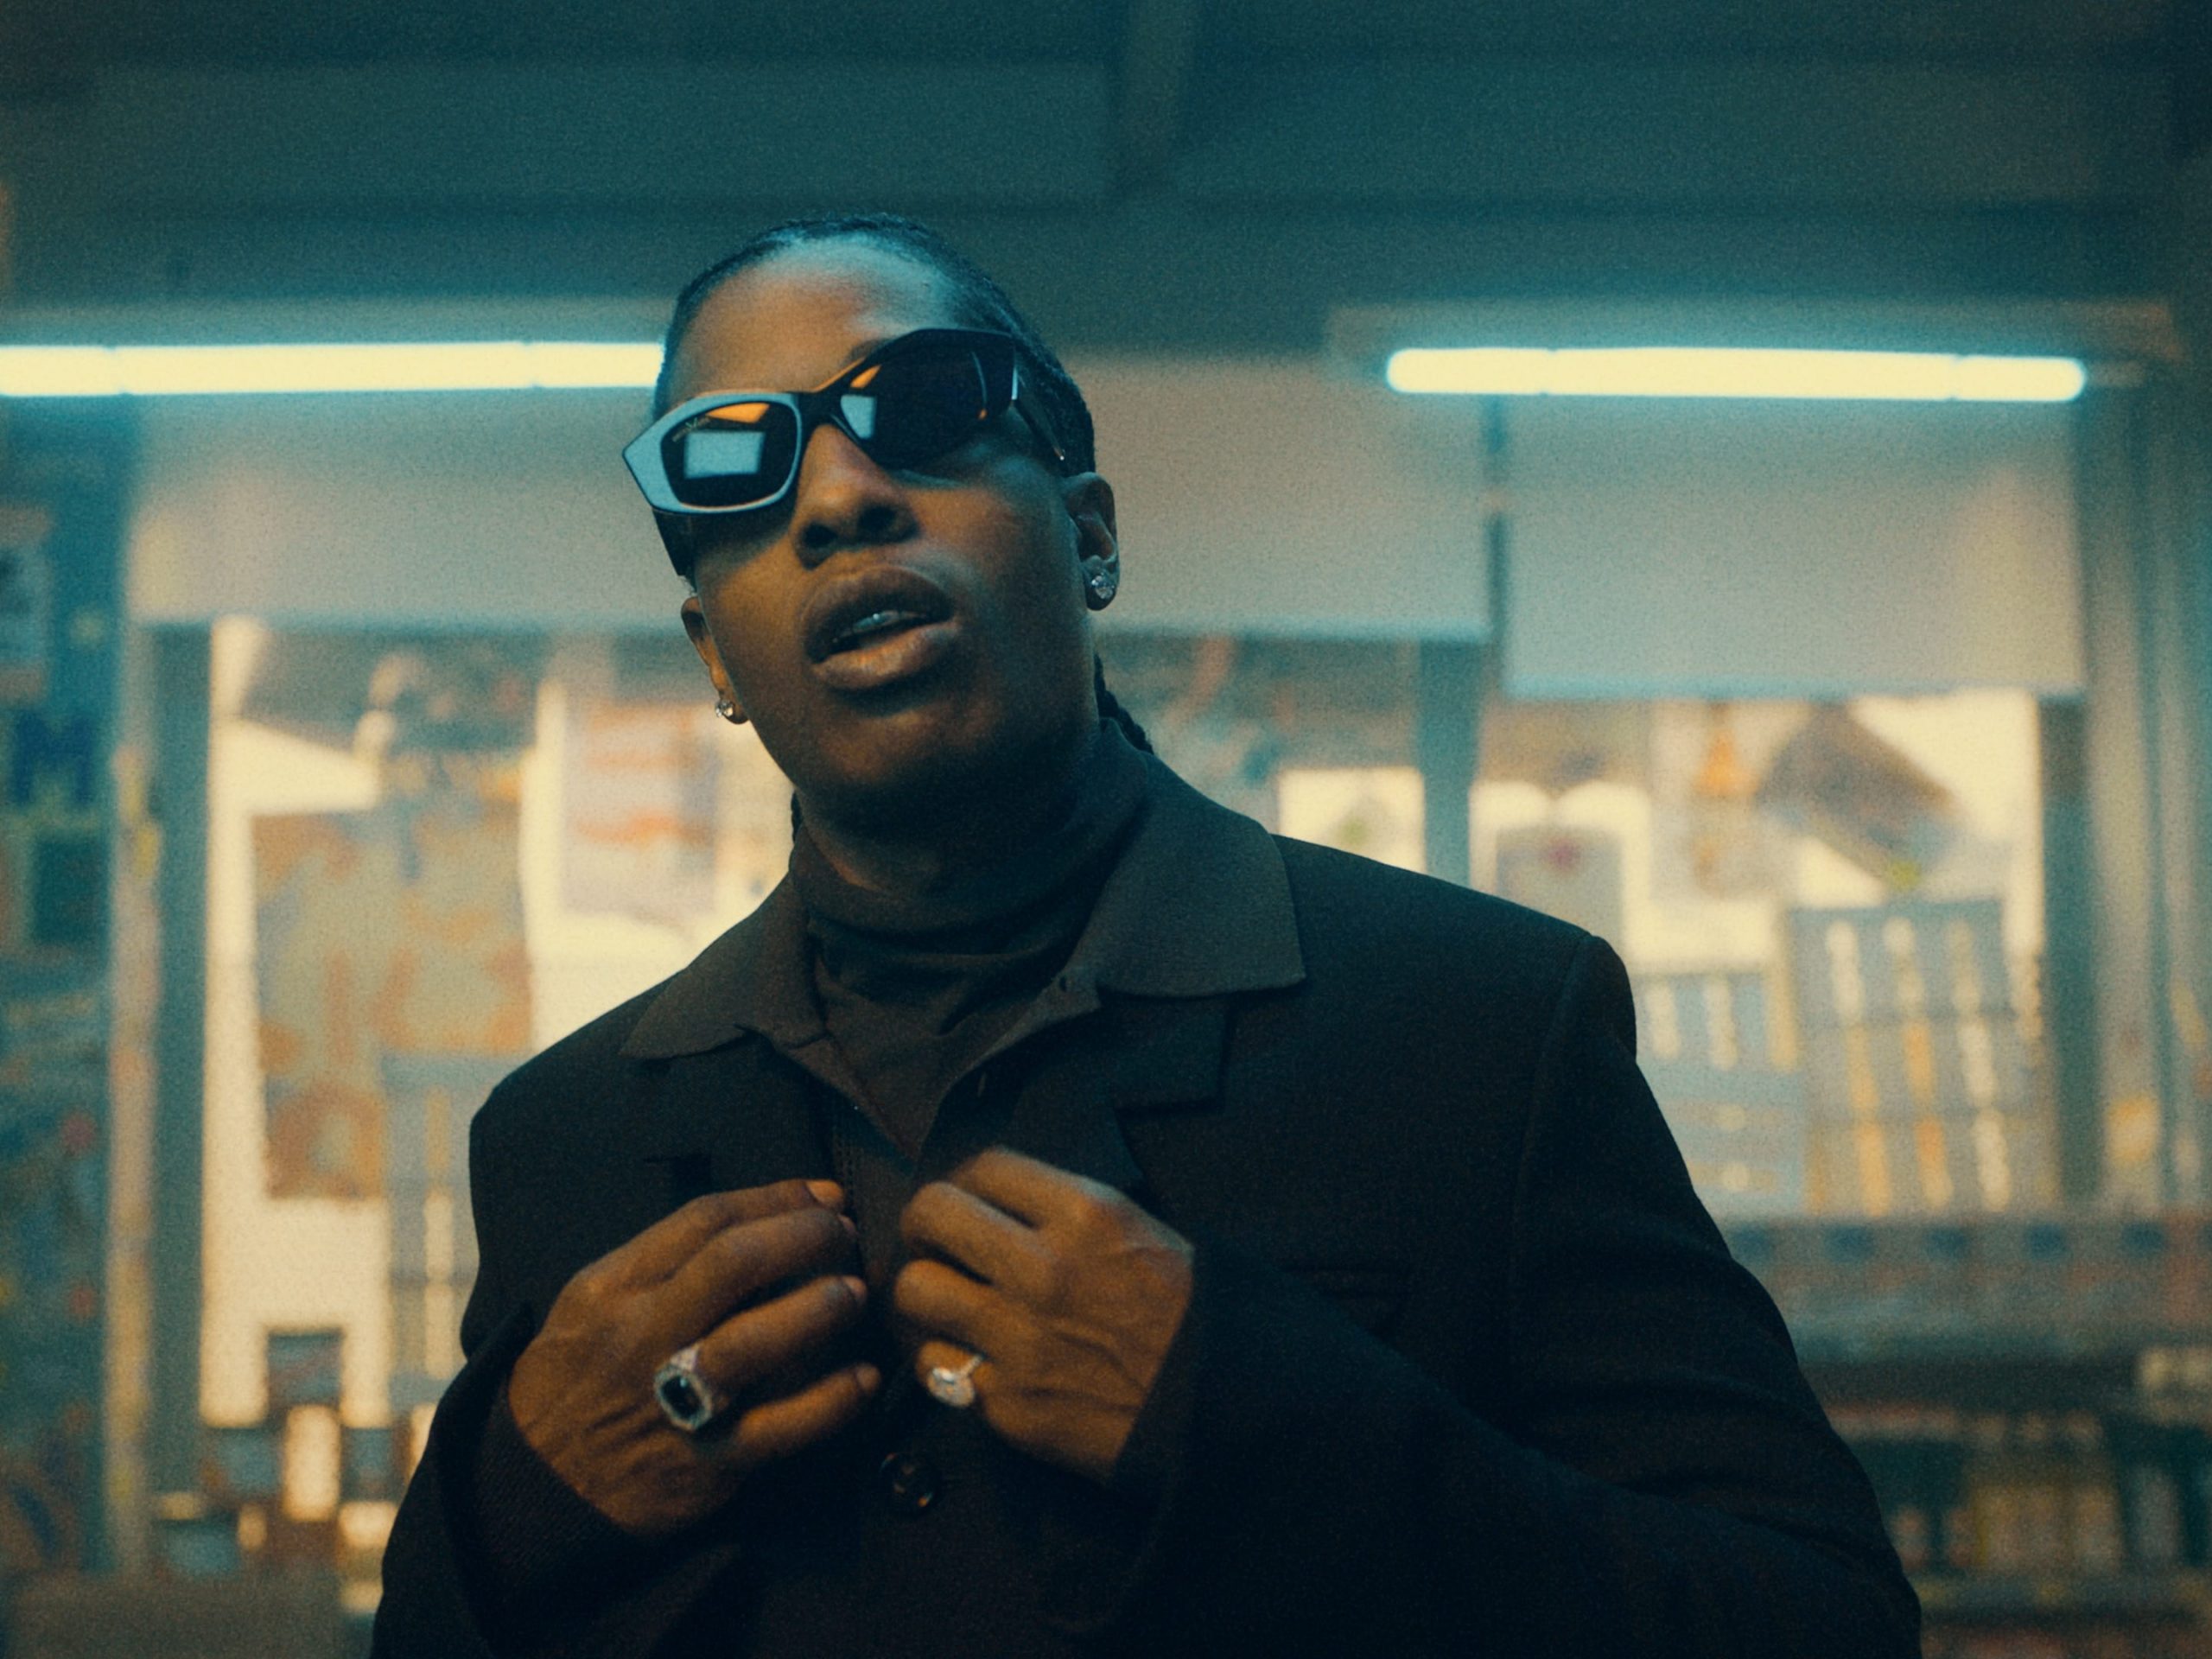 Hip-hop artist A$AP Rocky stars in a new campaign for the shopping service Klarna.